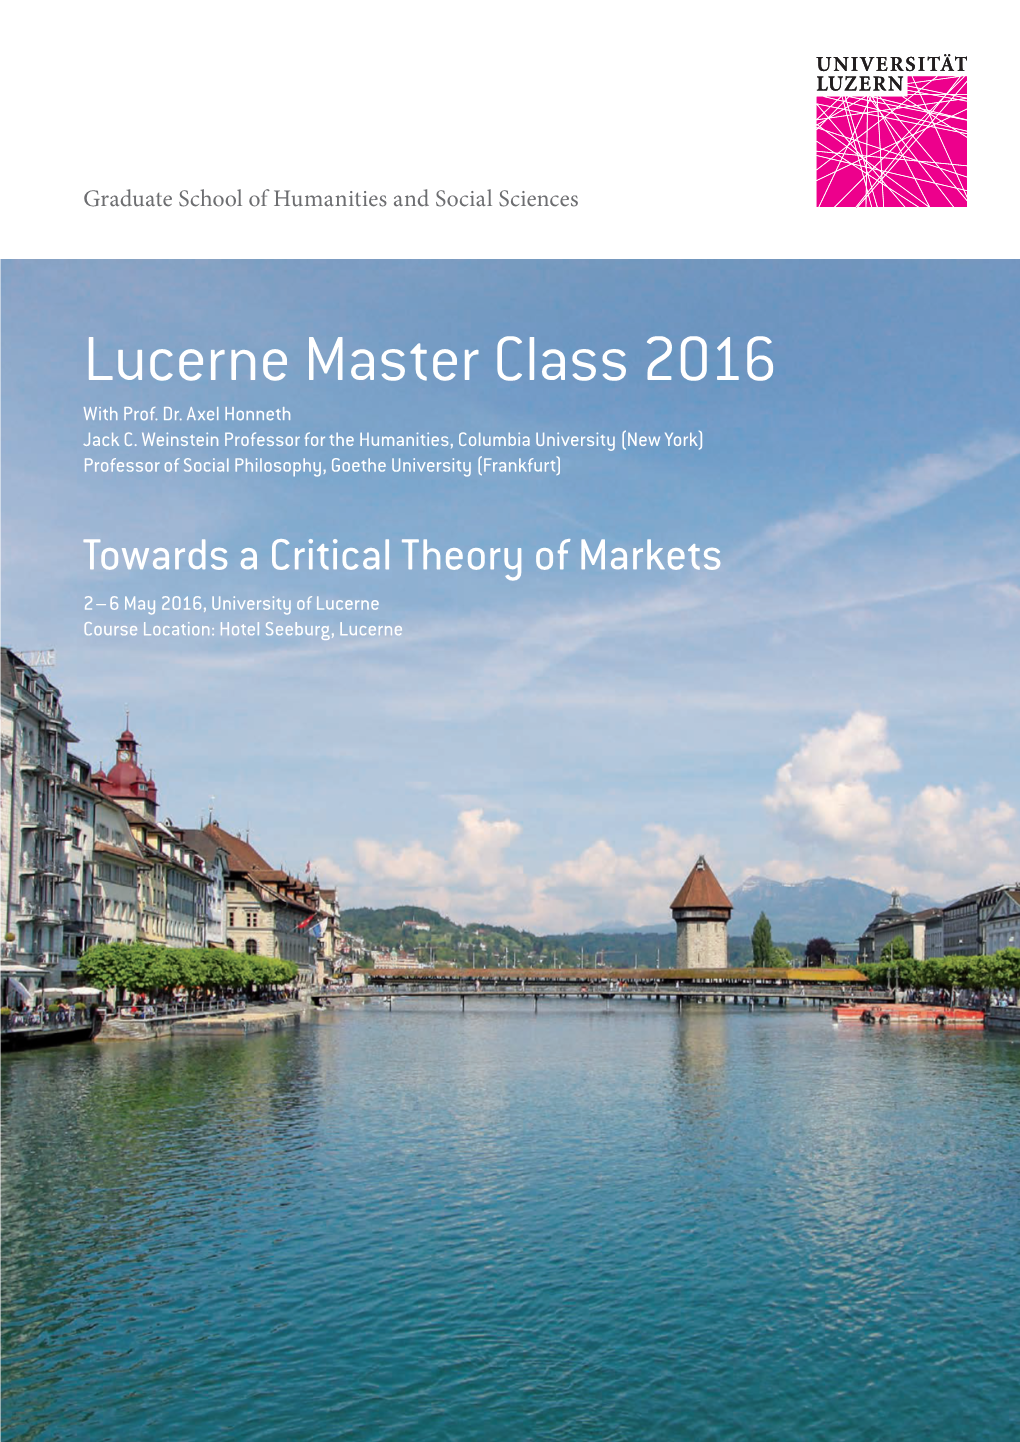 Lucerne Master Class 2016 with Prof